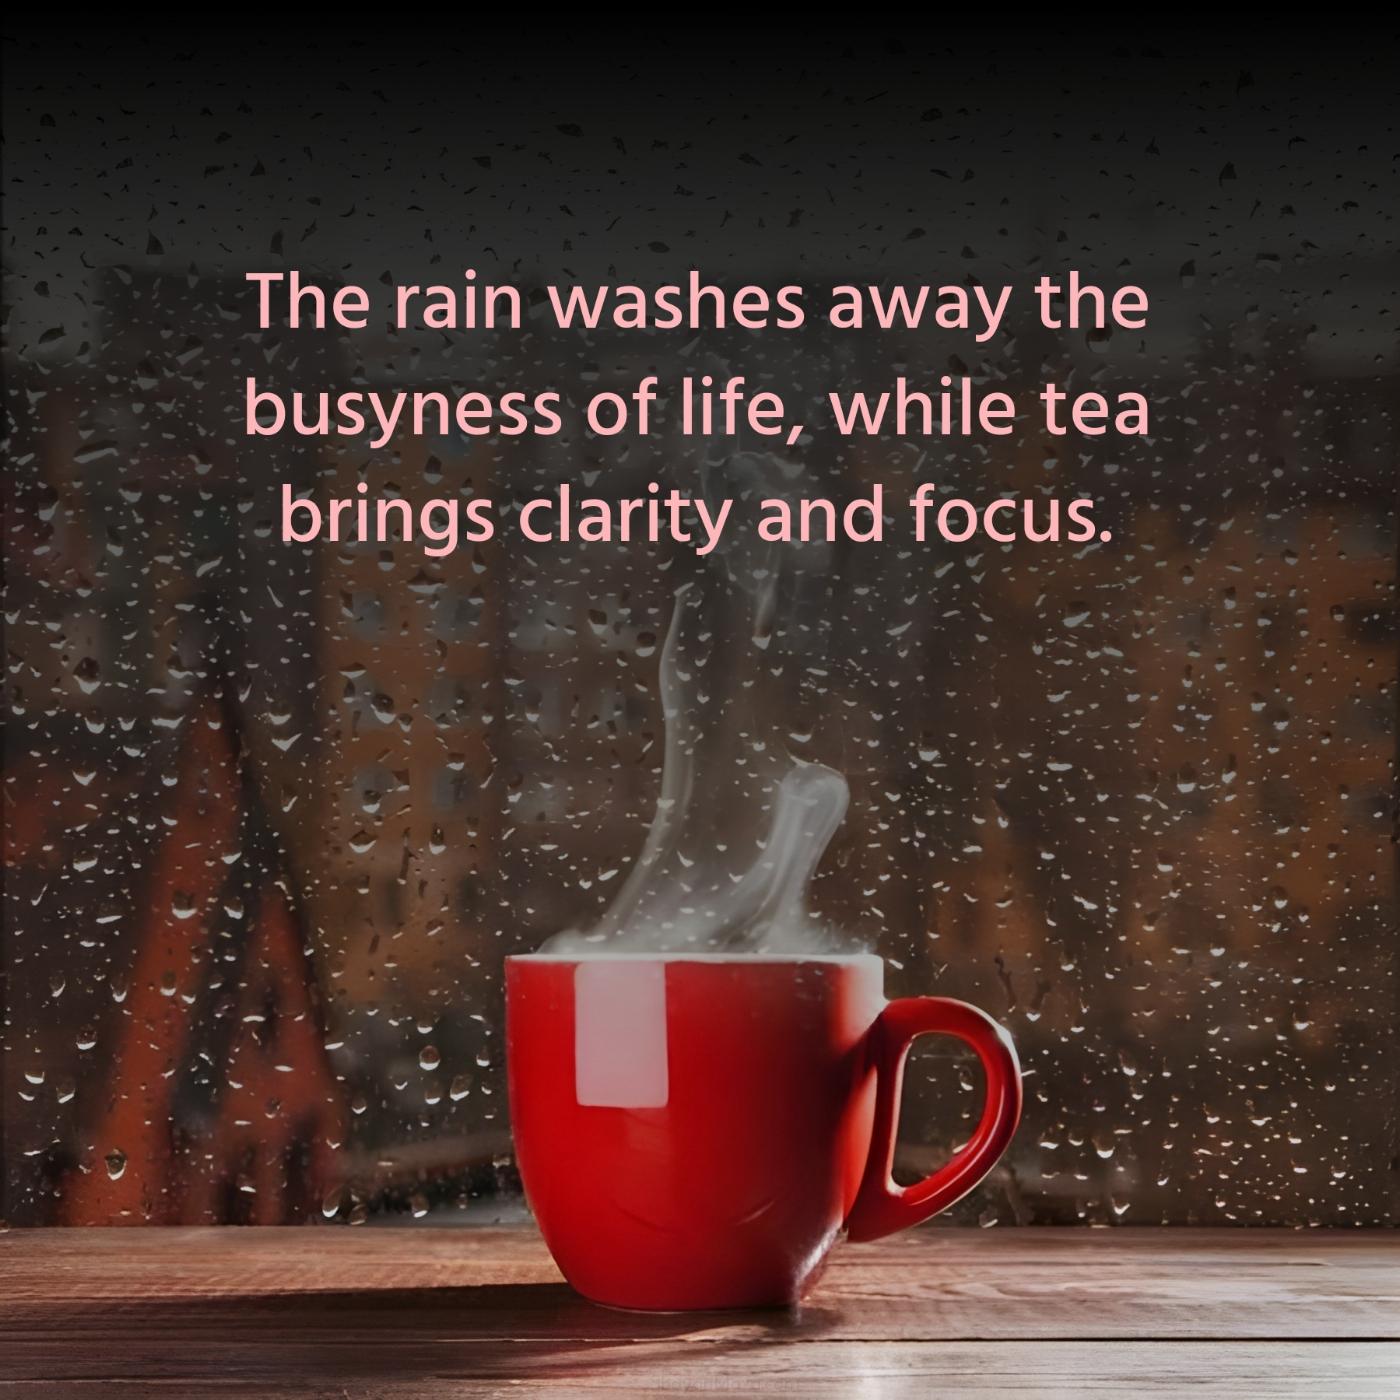 The rain washes away the busyness of life while tea brings clarity